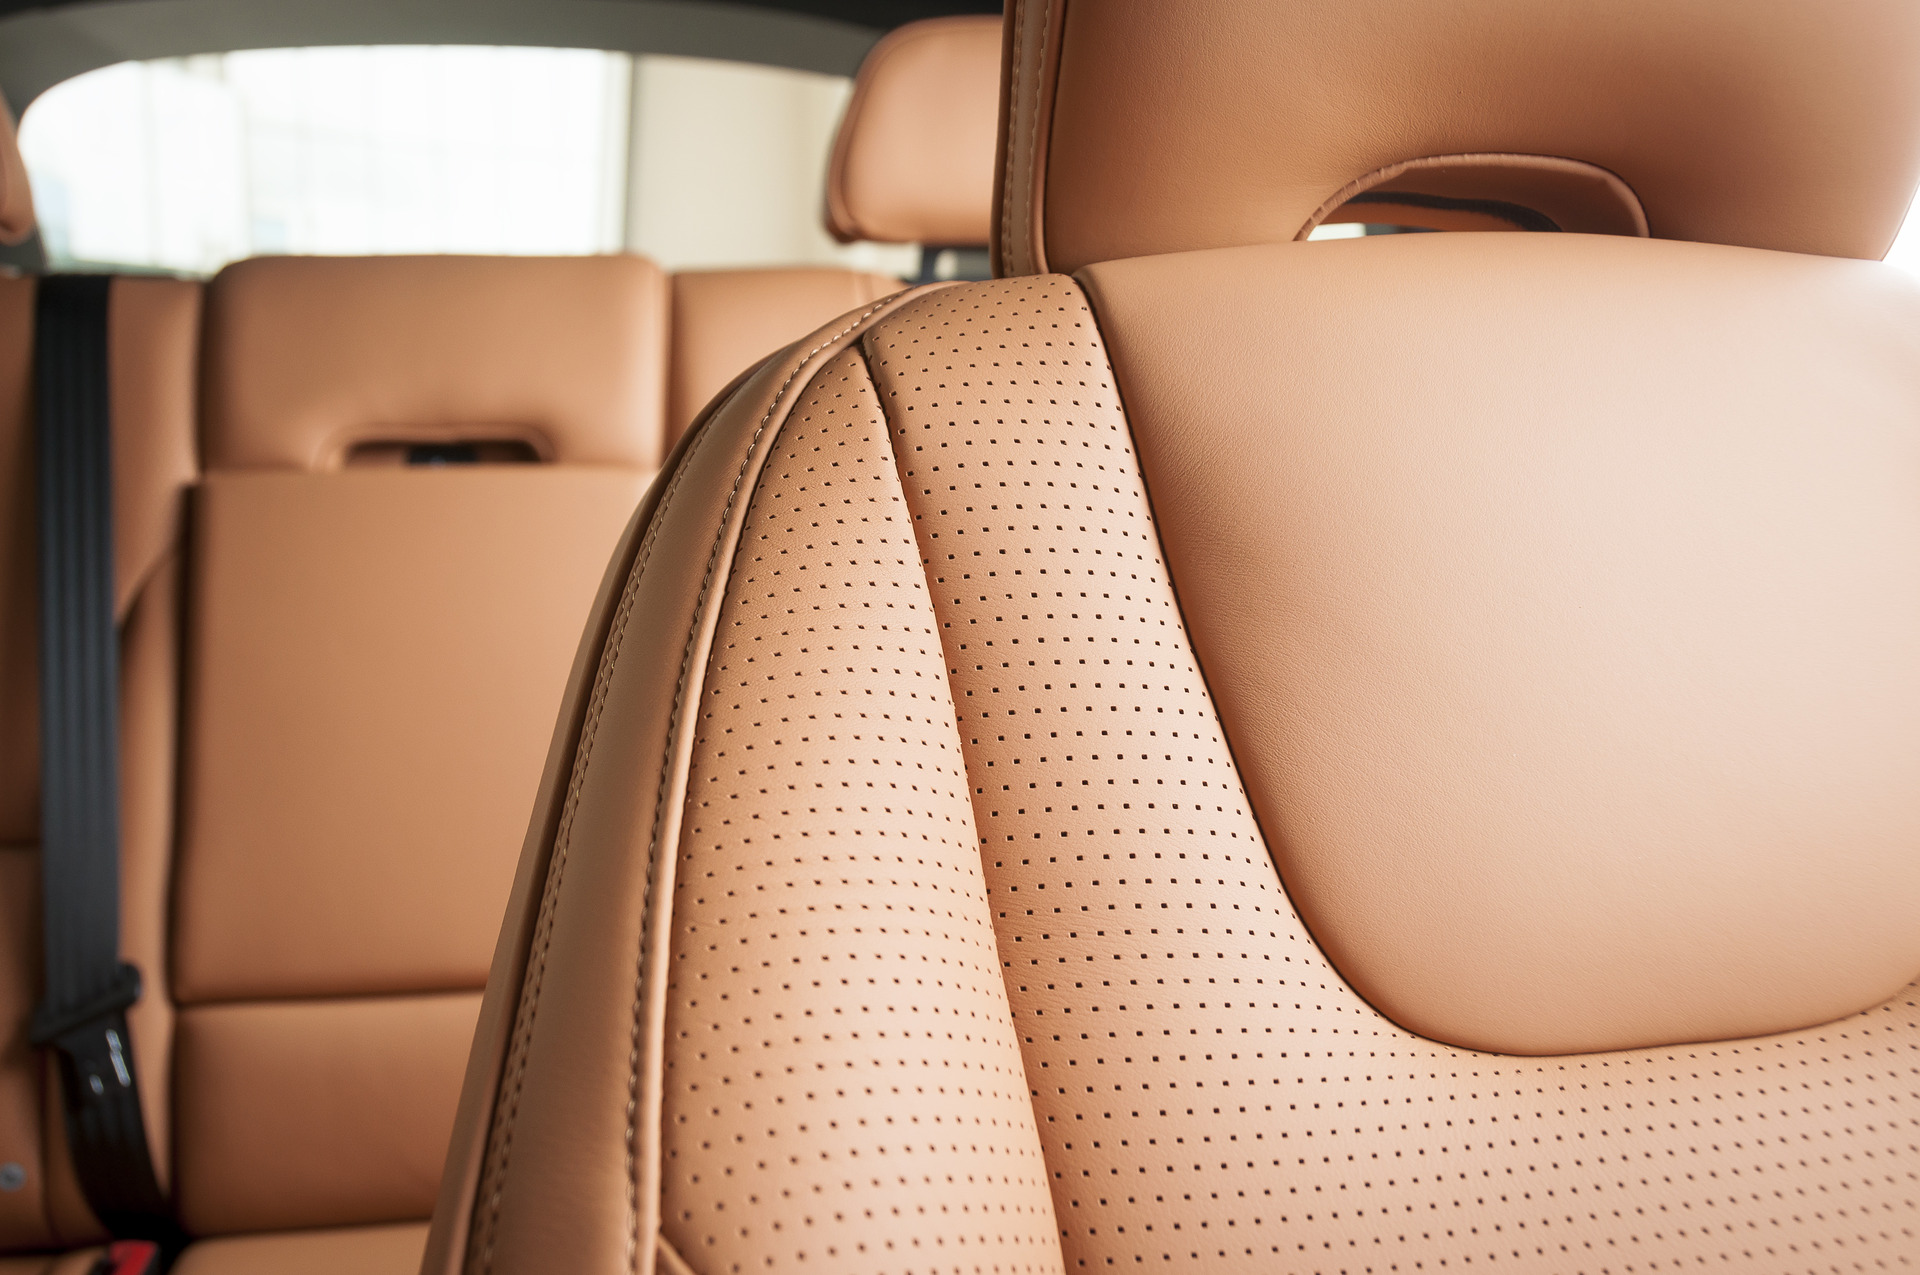 Beige leather seats of a car 